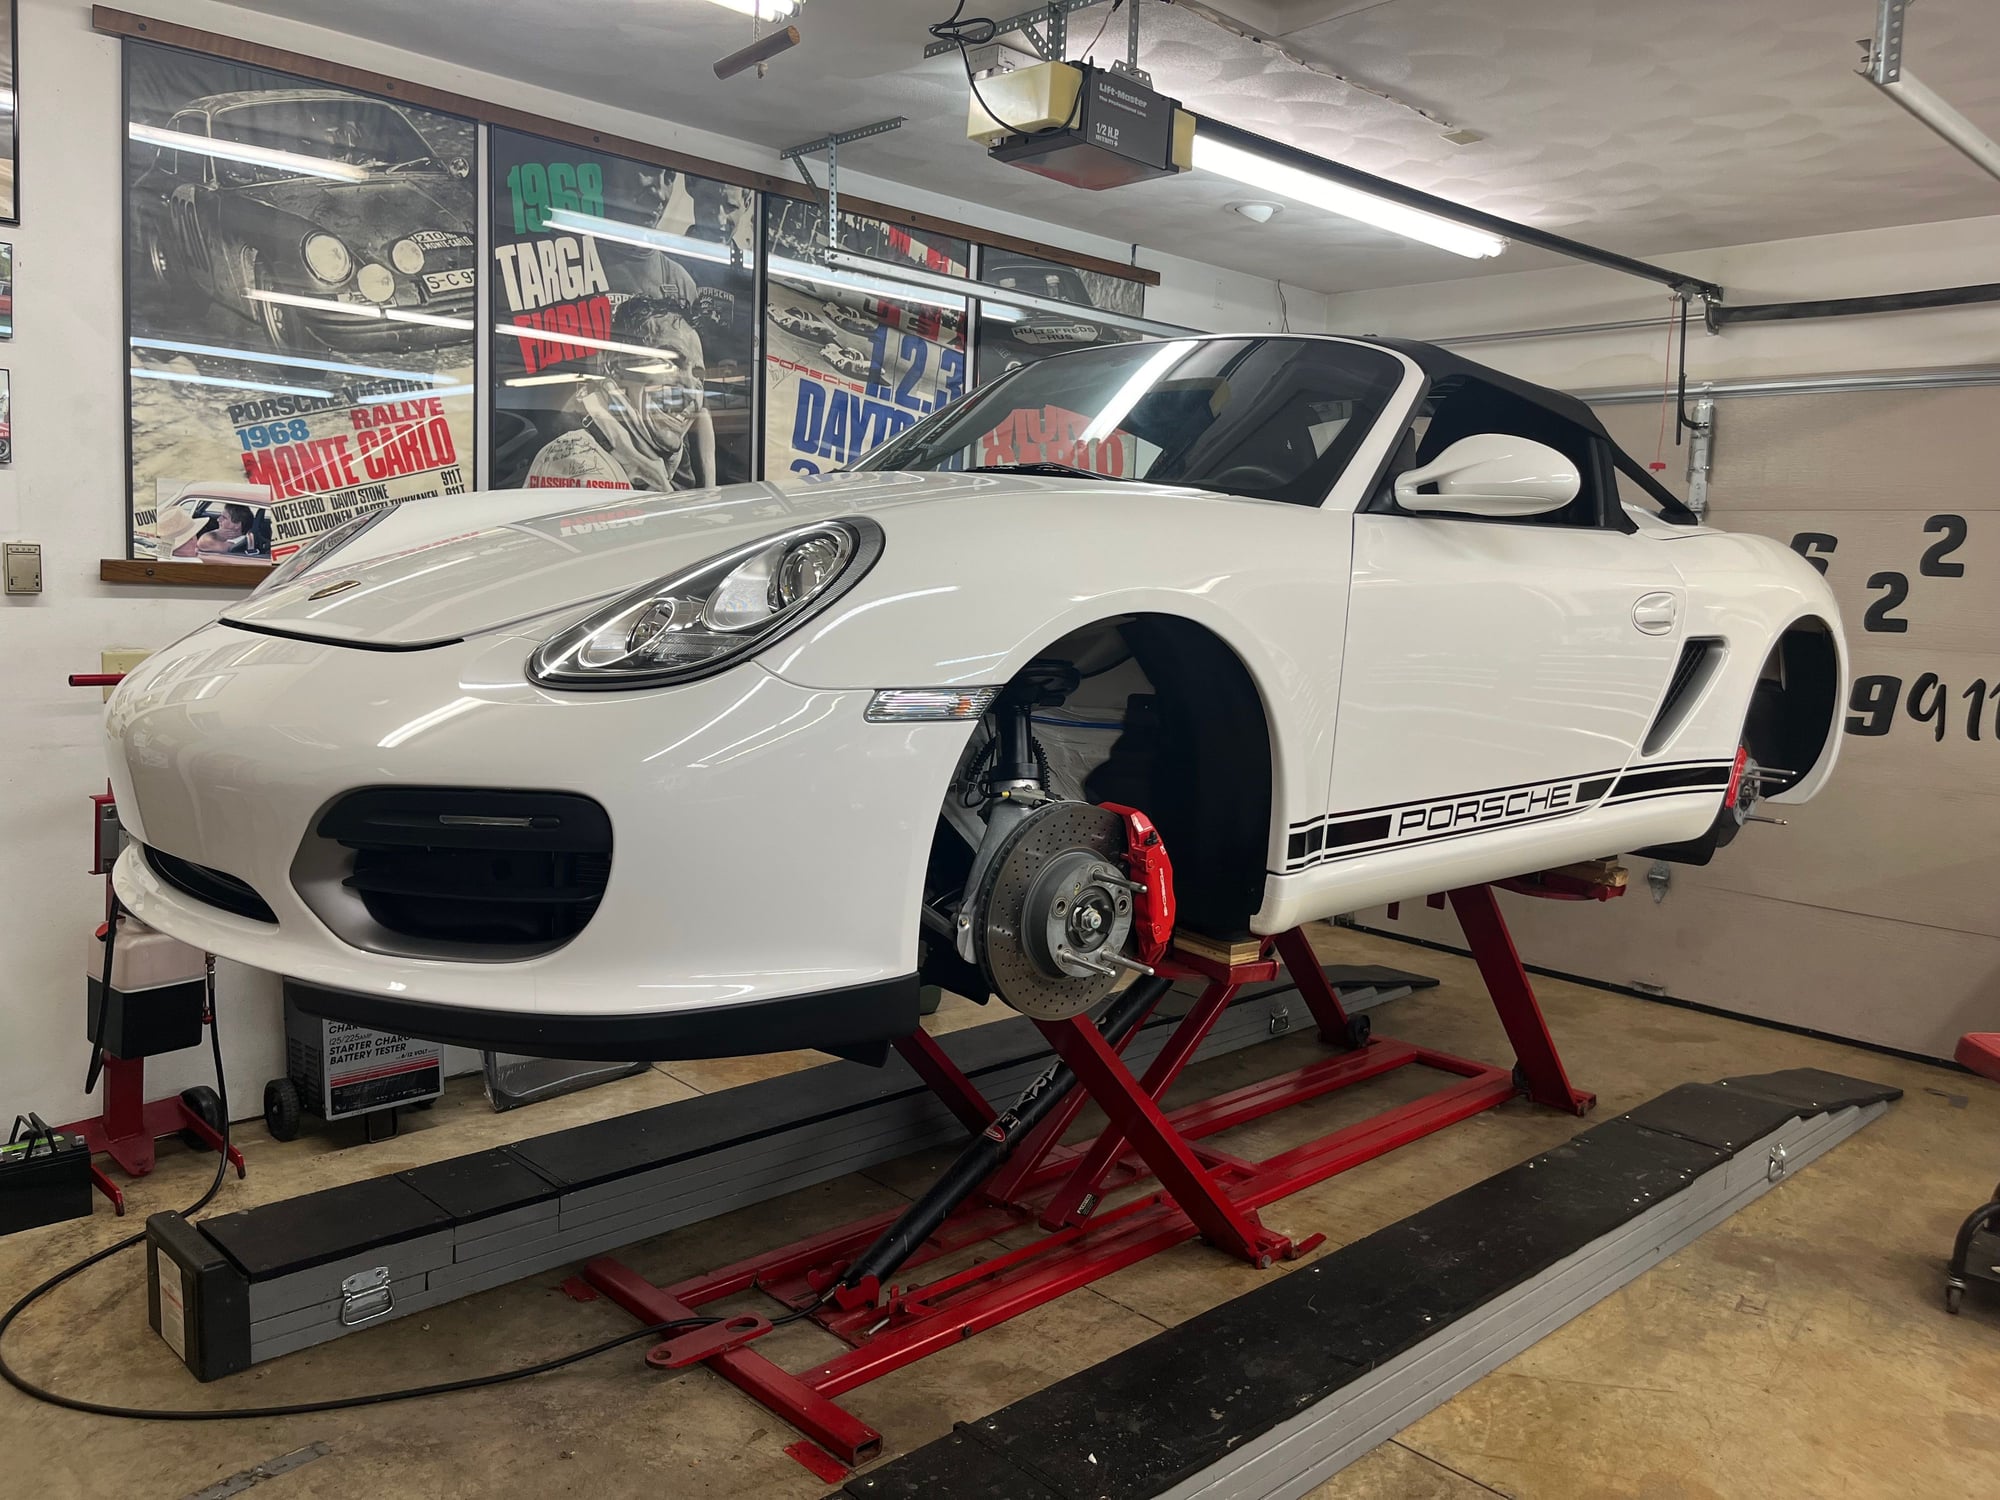 2011 Porsche Boxster - 2011 Boxster Spyder ...5000 miles! - Used - VIN WP0CB2A85BS745535 - 4,916 Miles - 6 cyl - 2WD - Manual - Convertible - White - Rockford, IL 61108, United States